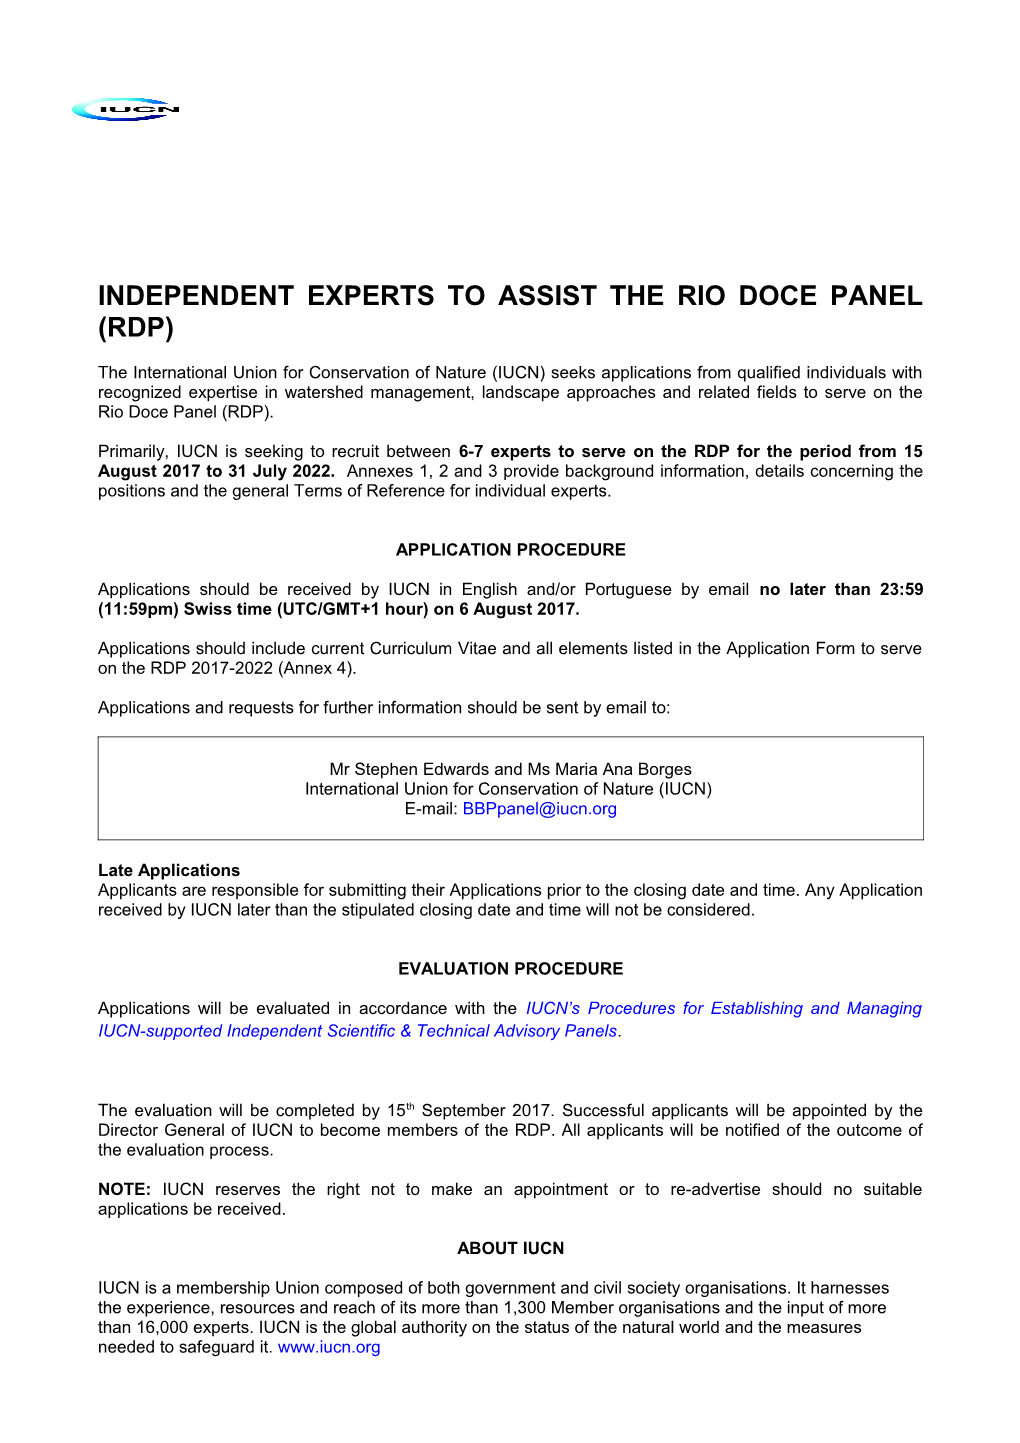 Independent Experts to Assist the Rio Doce Panel (Rdp)